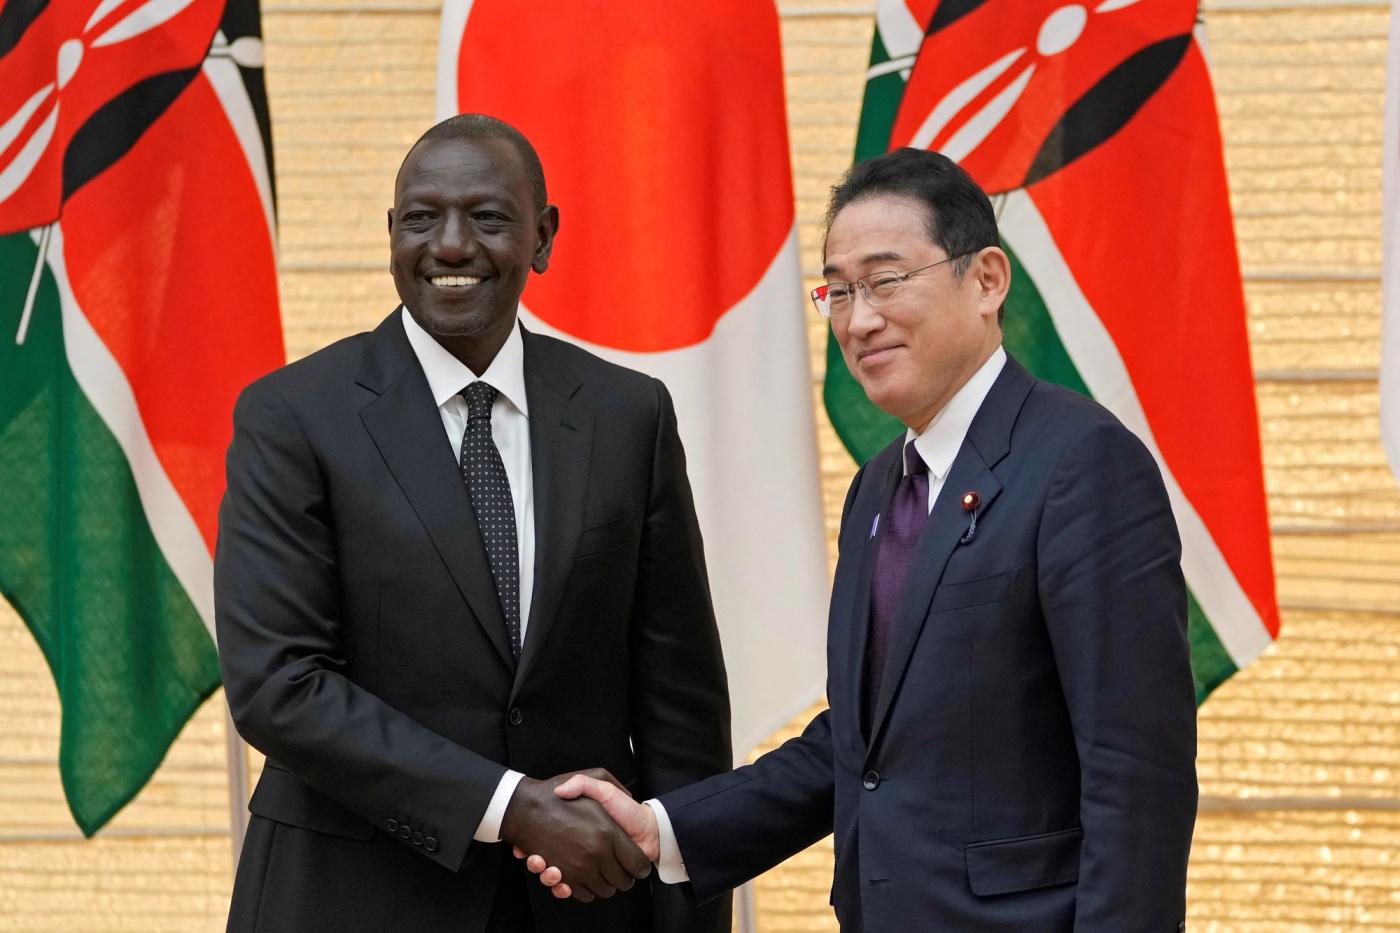 Kenyan President William Ruto and Japanese Prime Minister Fumio Kishida shake hands at the end of their joint press conference at the prime minister's office in Tokyo